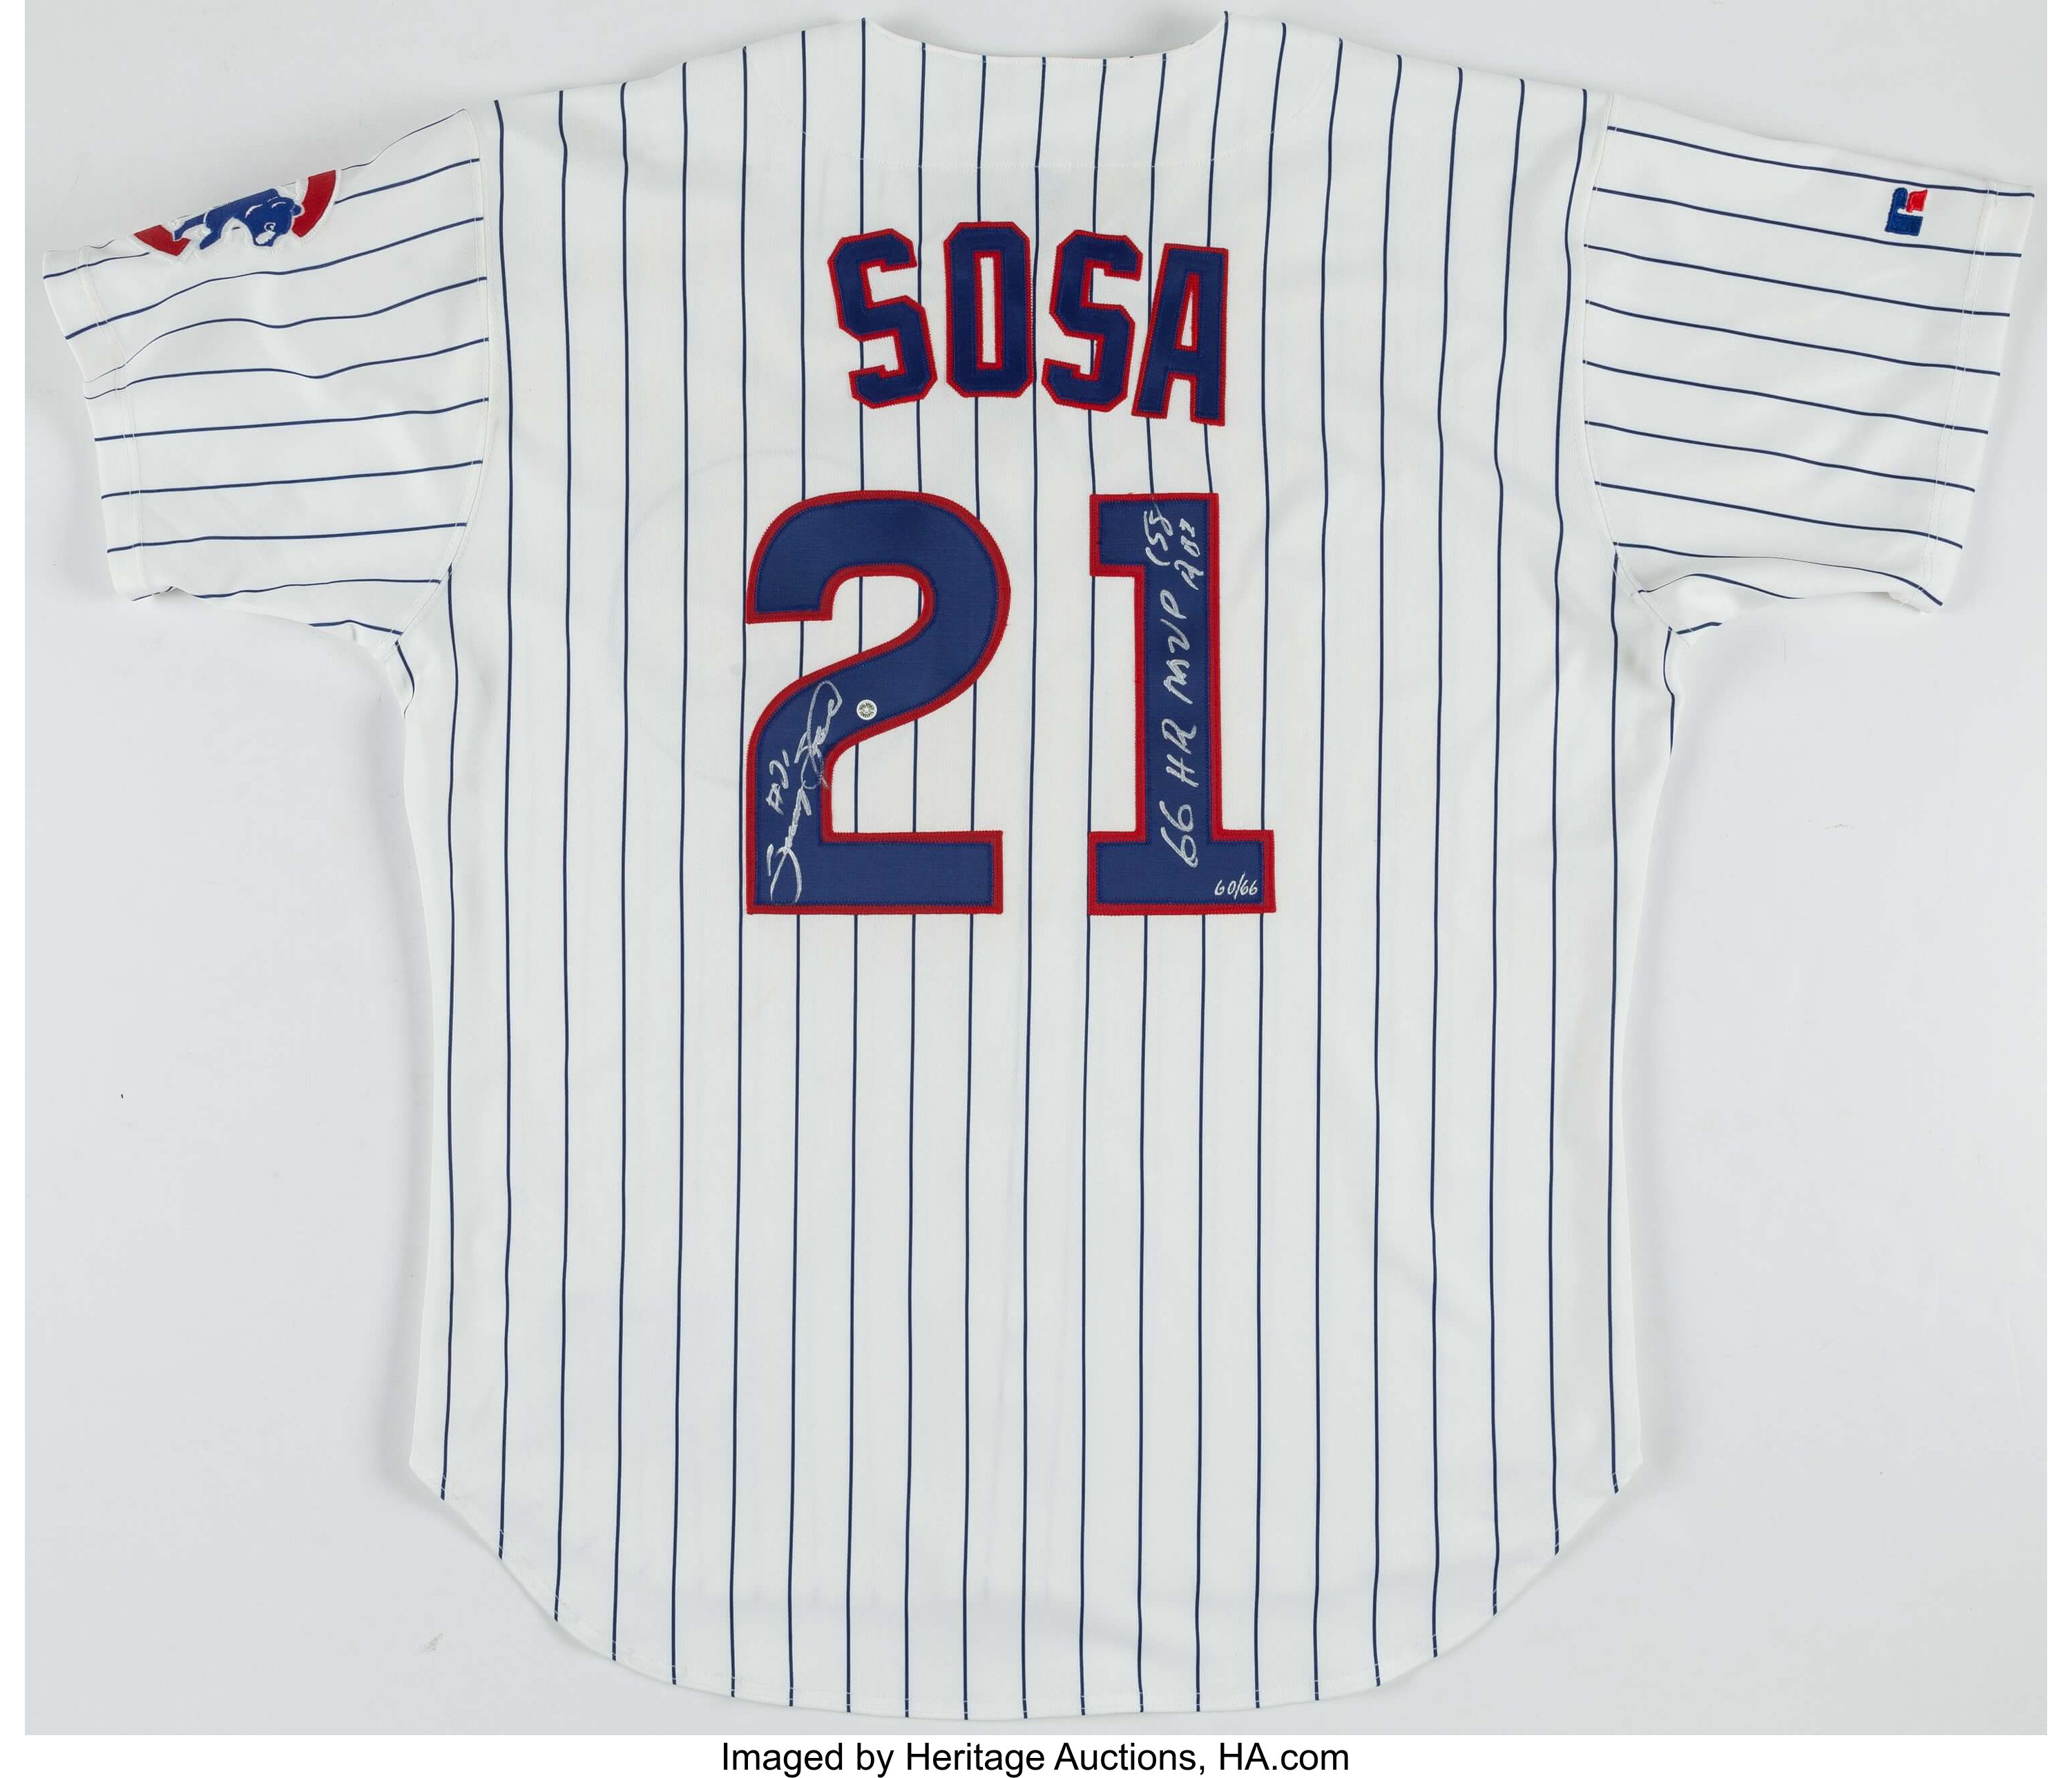 Sammy Sosa Signed Chicago Cubs Jersey - Includes 66 HR MVP 158